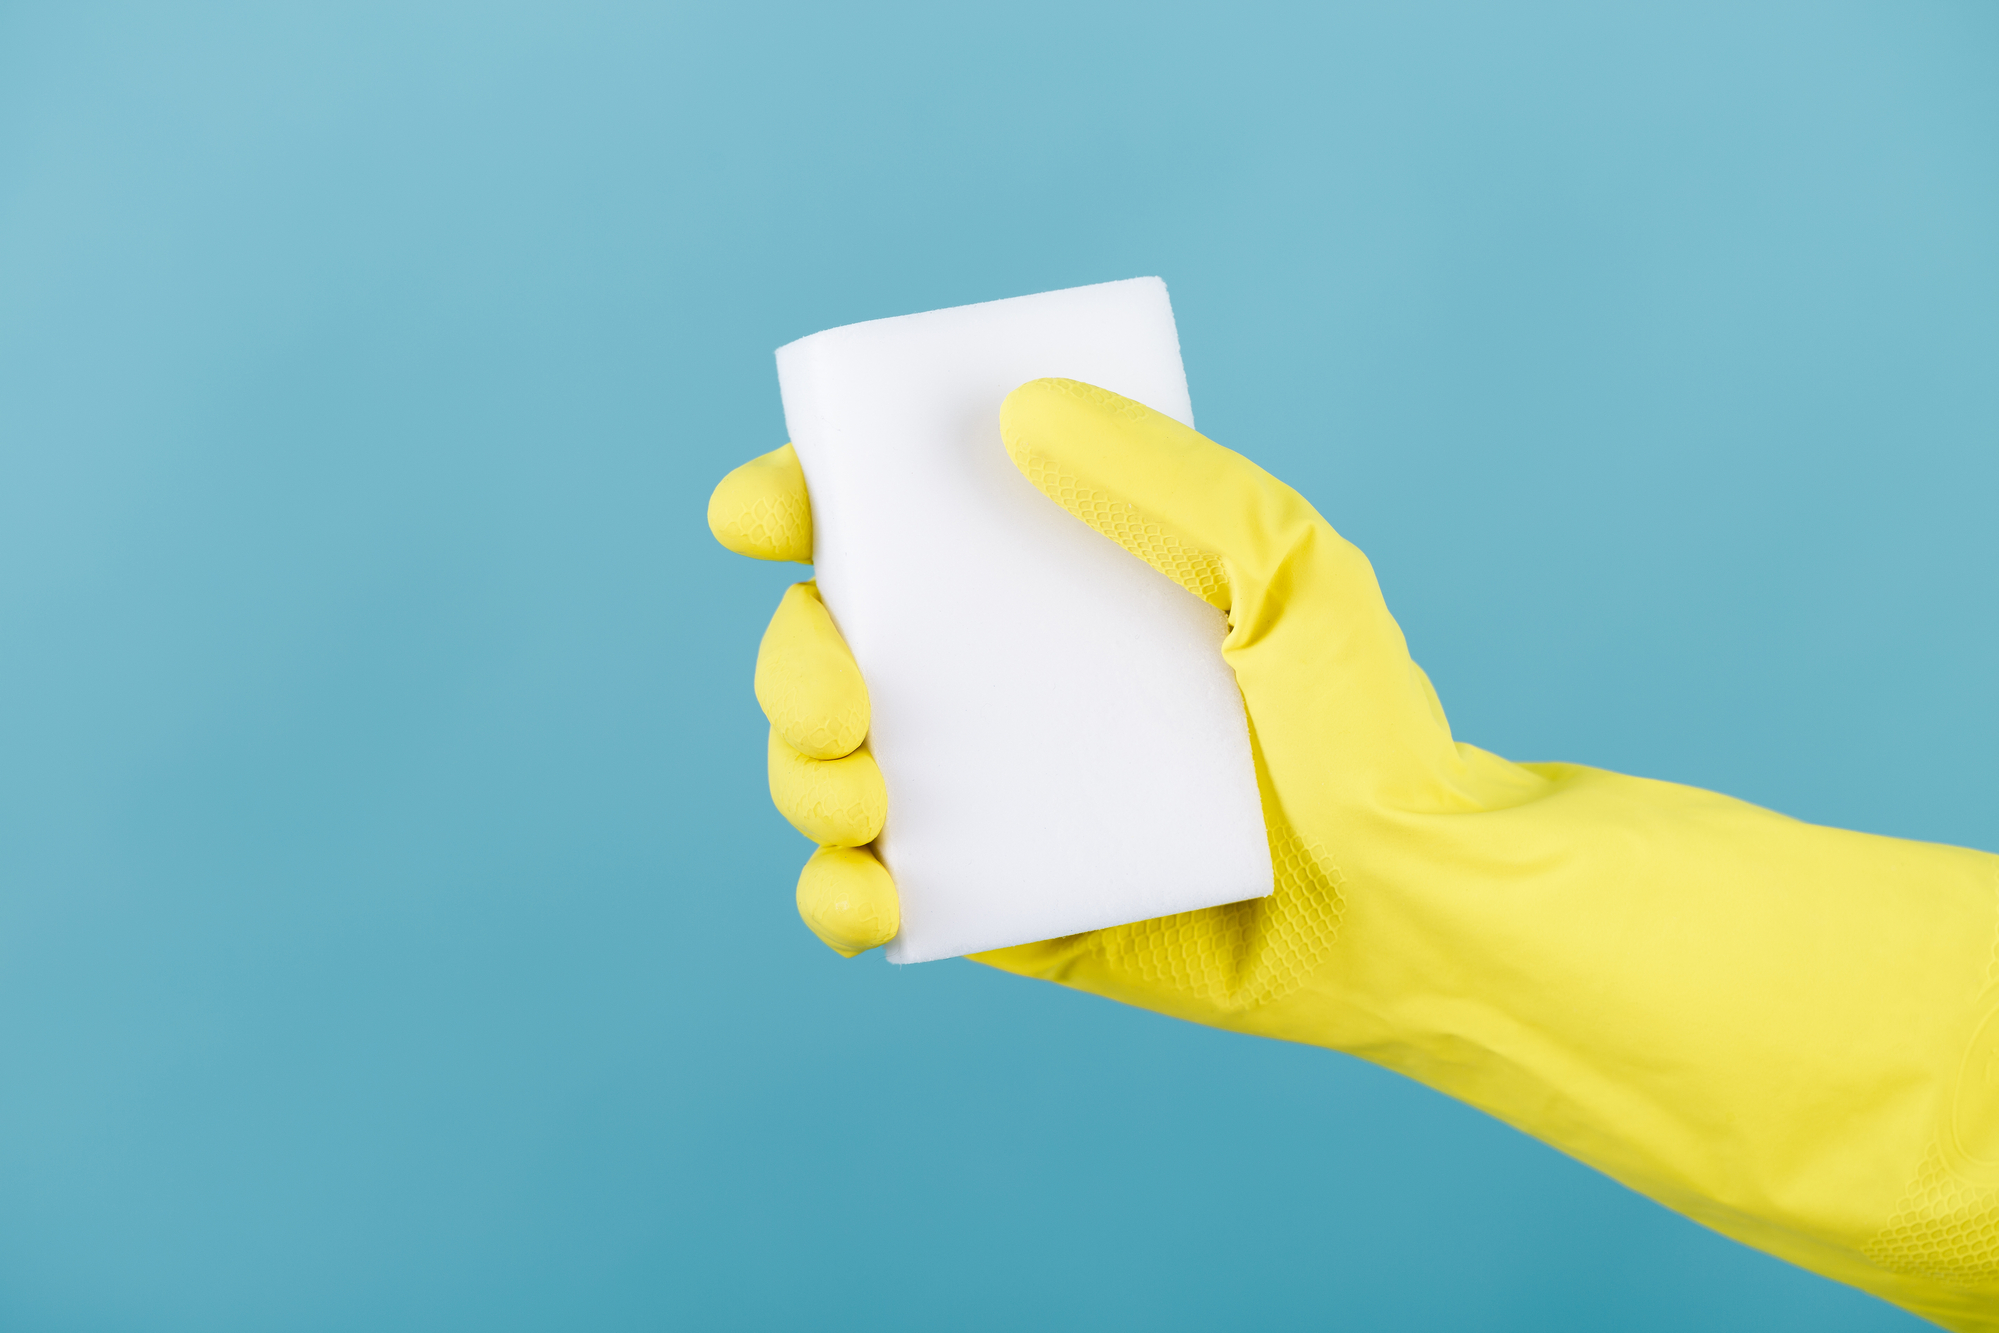 12 Brilliant Uses For A Magic Eraser You Have To Try